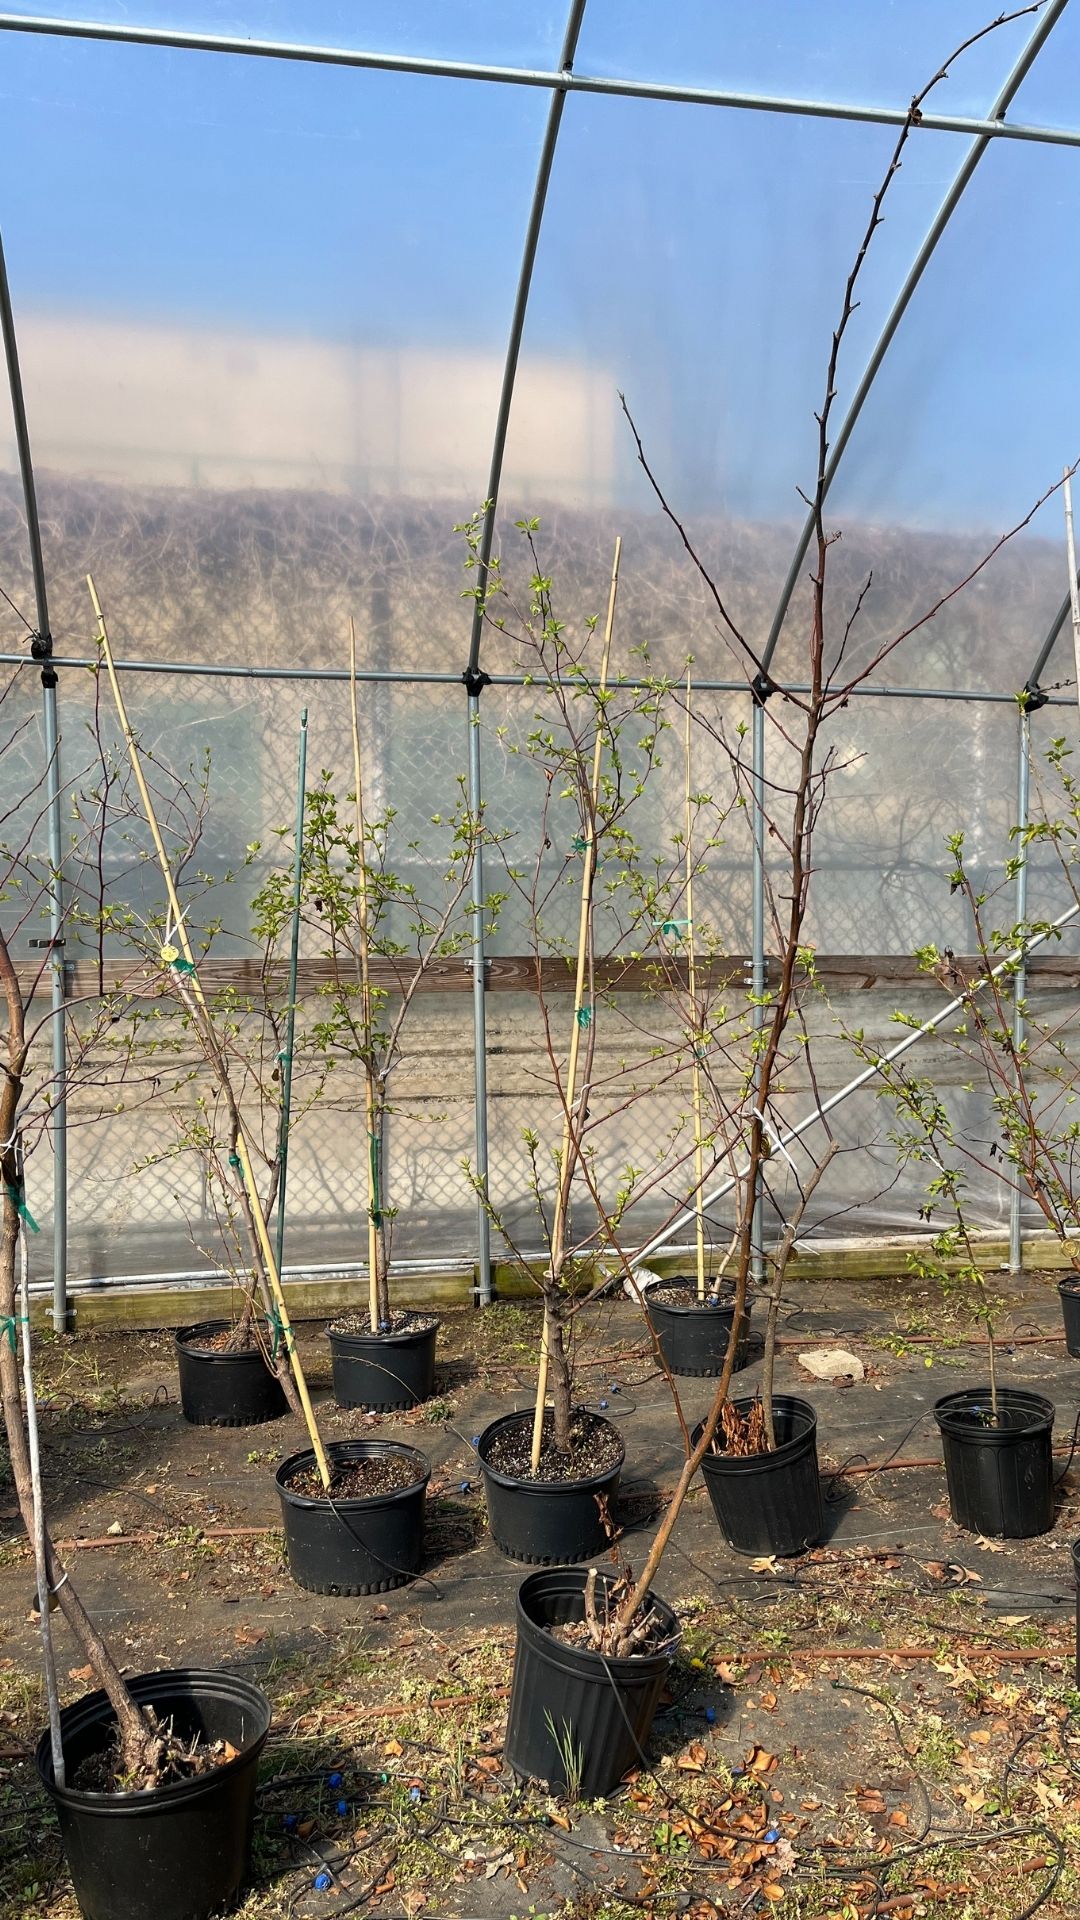 Young trees in black plant holders against a bright blue sky